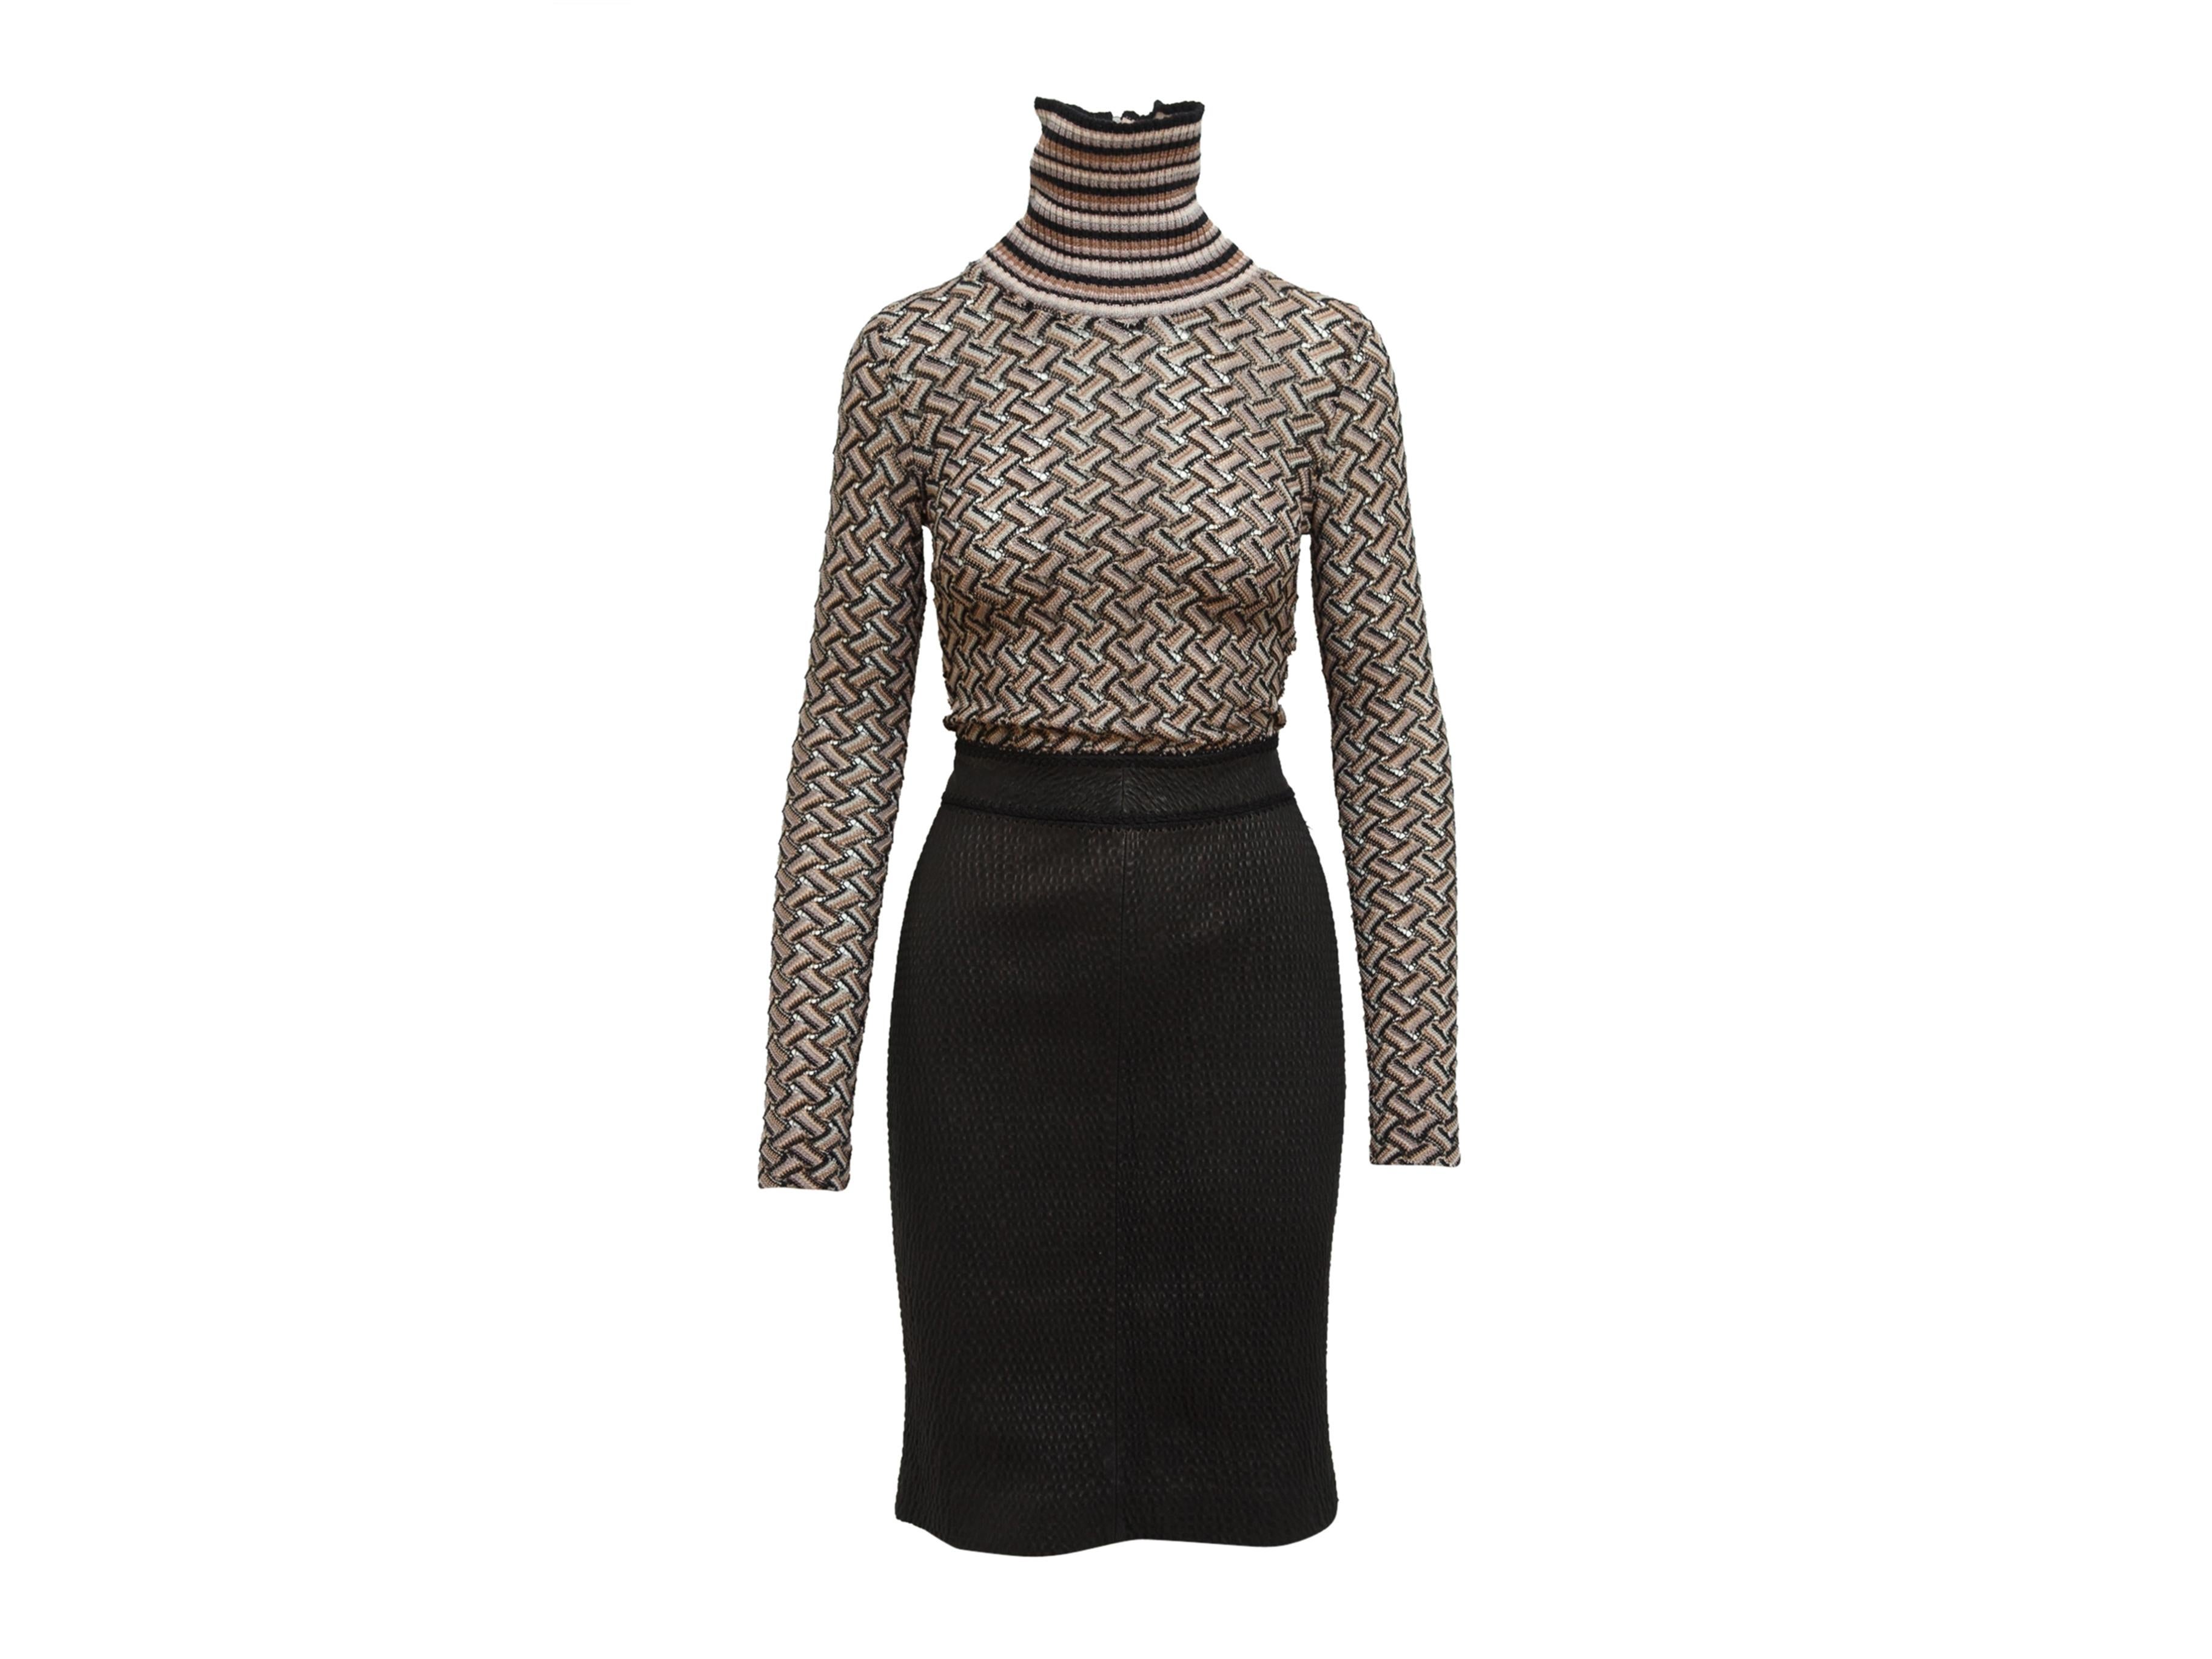 Product details: Brown and black knit dress by Missoni. Turtleneck. Long sleeves. Tonal pattern throughout. Exposed zip closure at back. Designer size IT38. 30